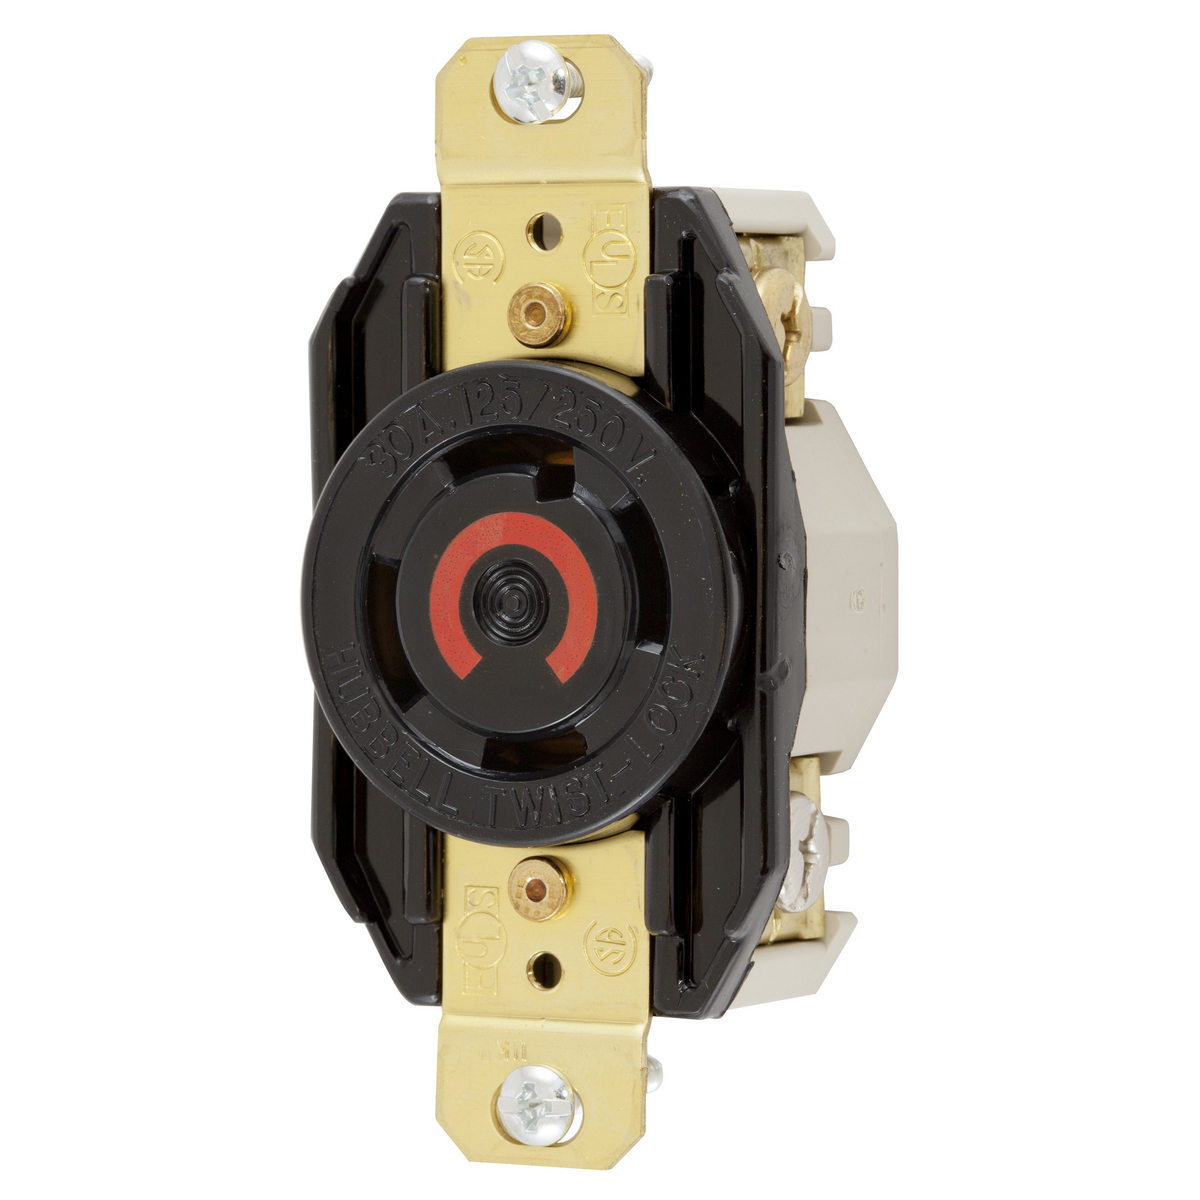 Locking Devices Twist Lock Industrial Flush Receptacle A V Pole Wire